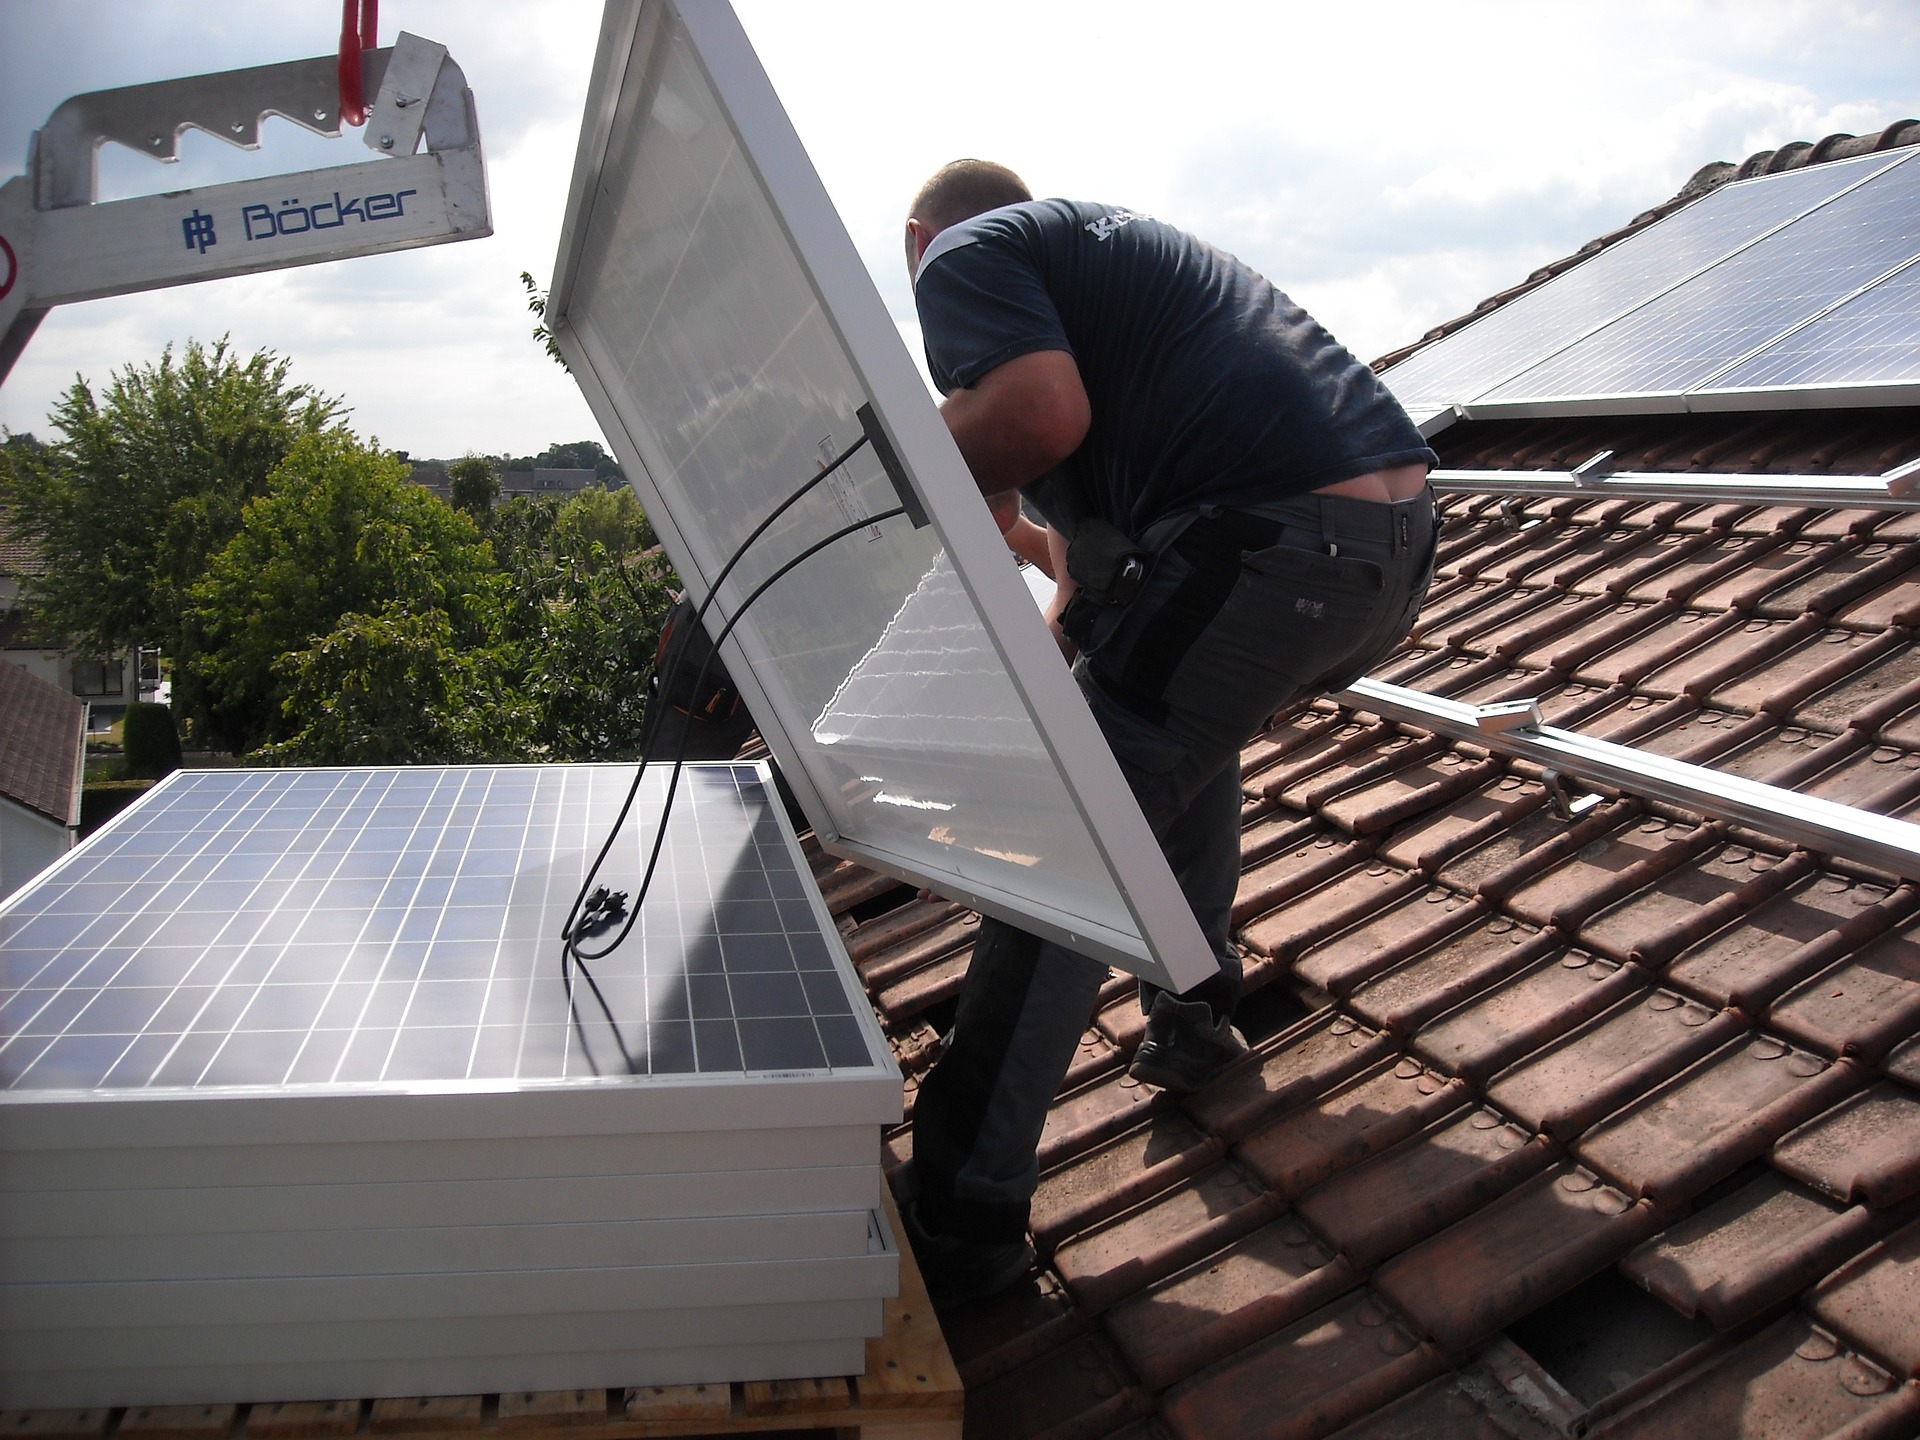 How to Finance Your Rooftop Solar Energy System